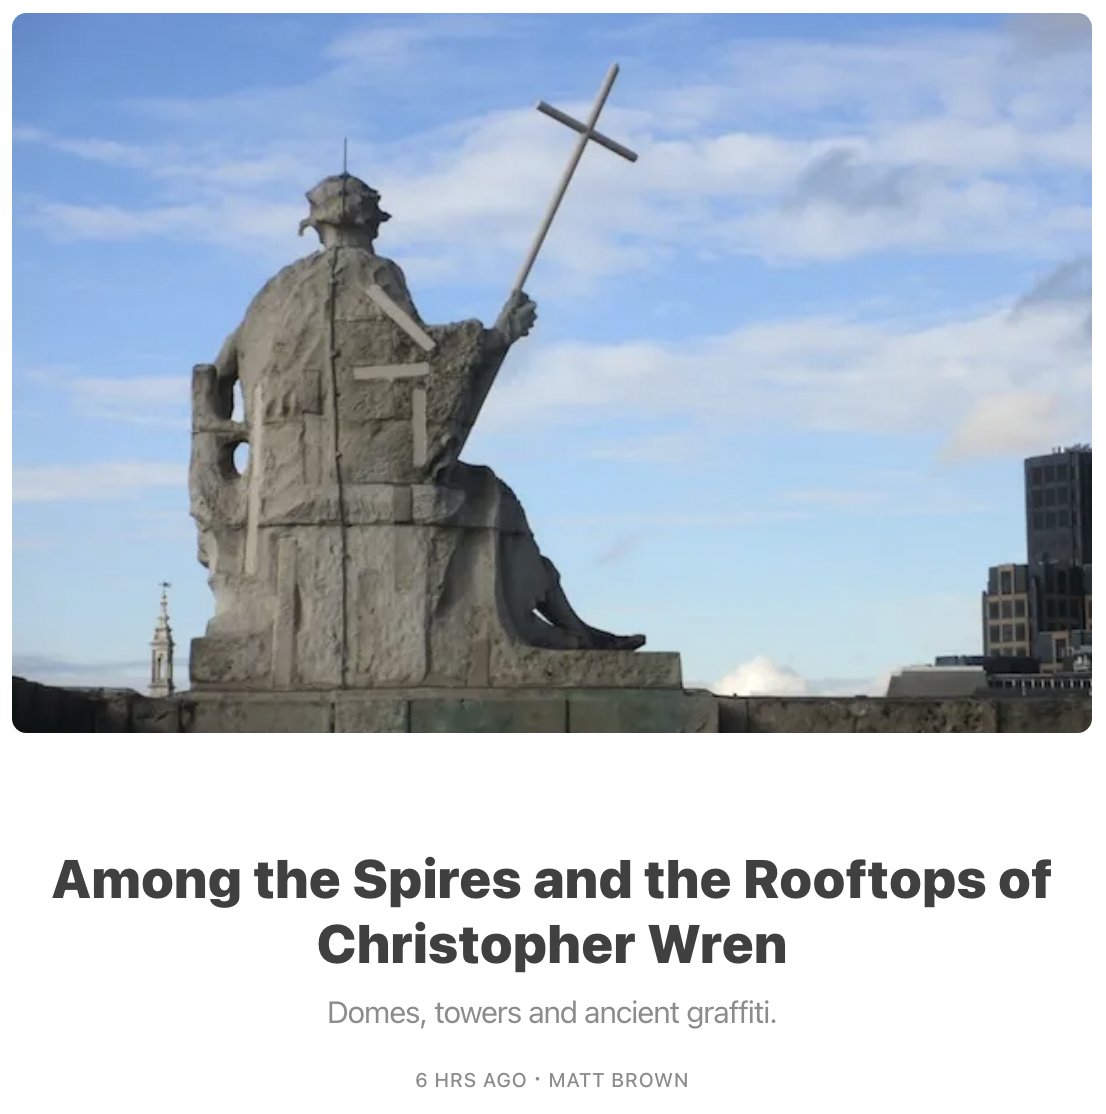 I've been on a few rooftops in my time. In this week's Londonist: Time Machine, I look at some of the hidden details on top of 5 famous Christopher Wren buildings londonist.substack.com/p/among-the-sp…